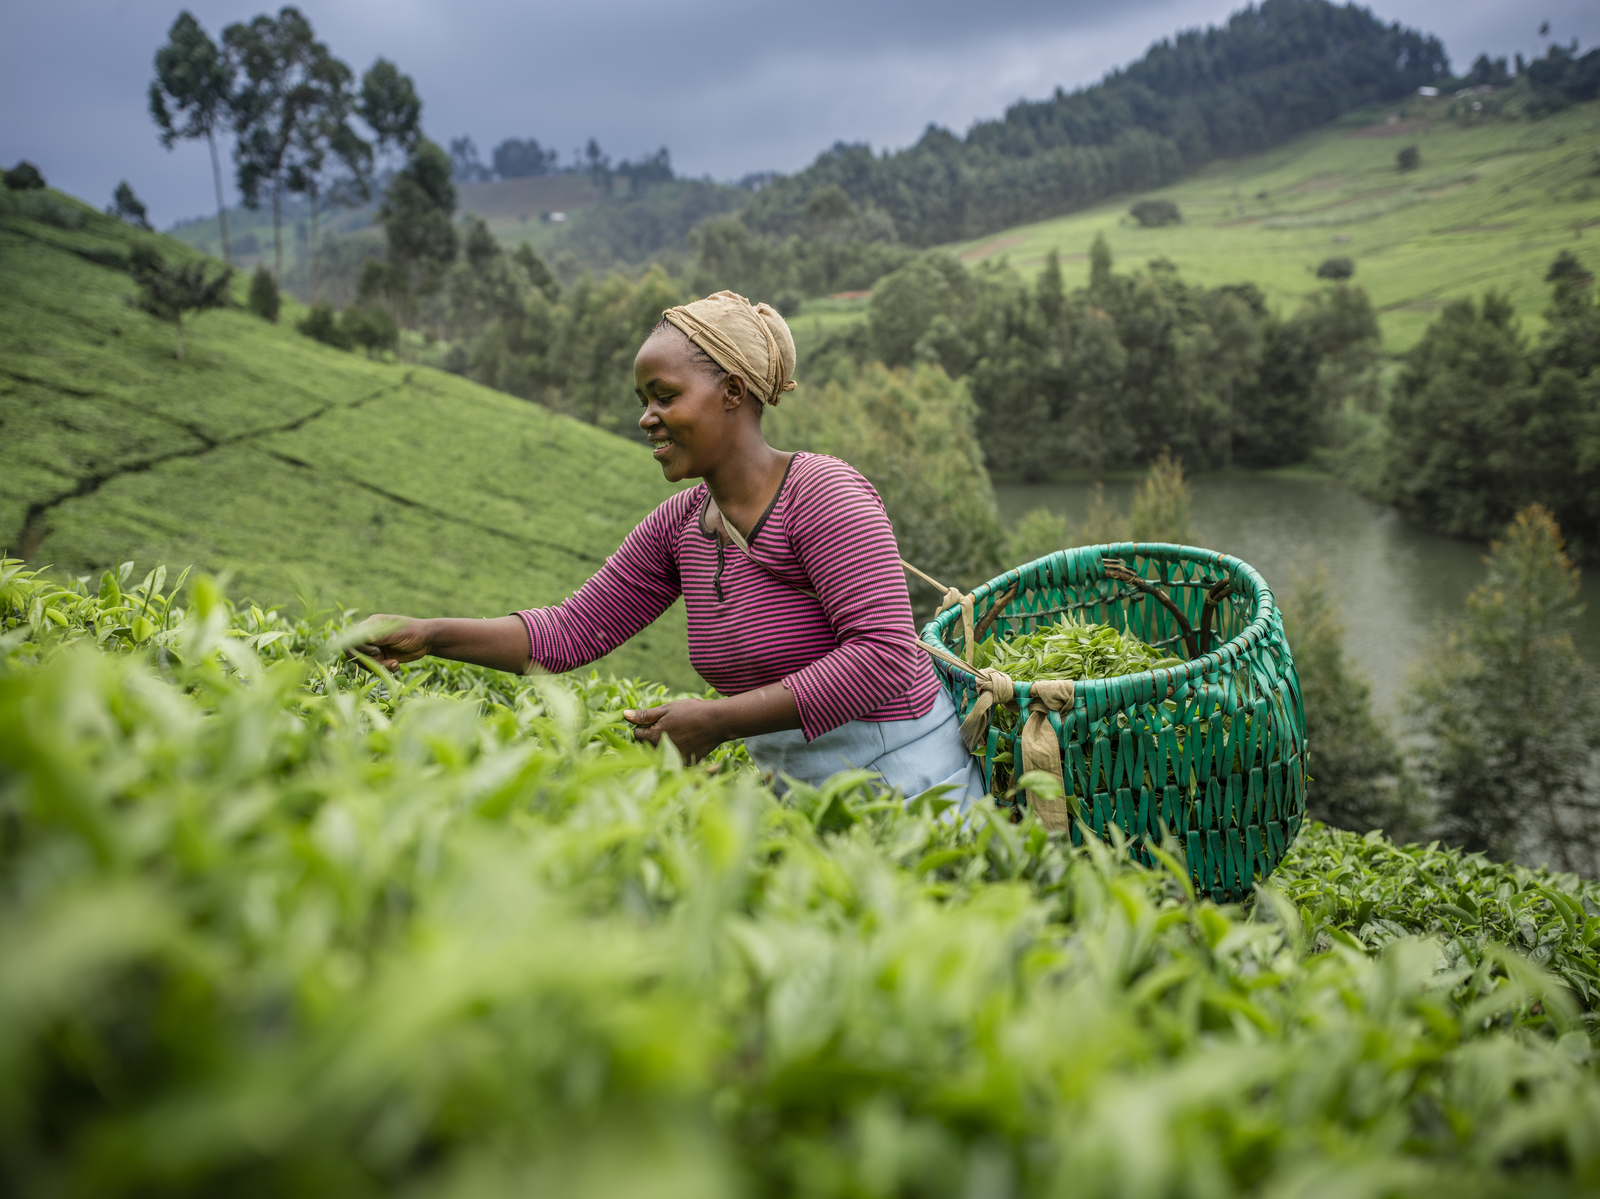 A woman picks leaves and puts them in a basket on a hillside agricultural landscape.